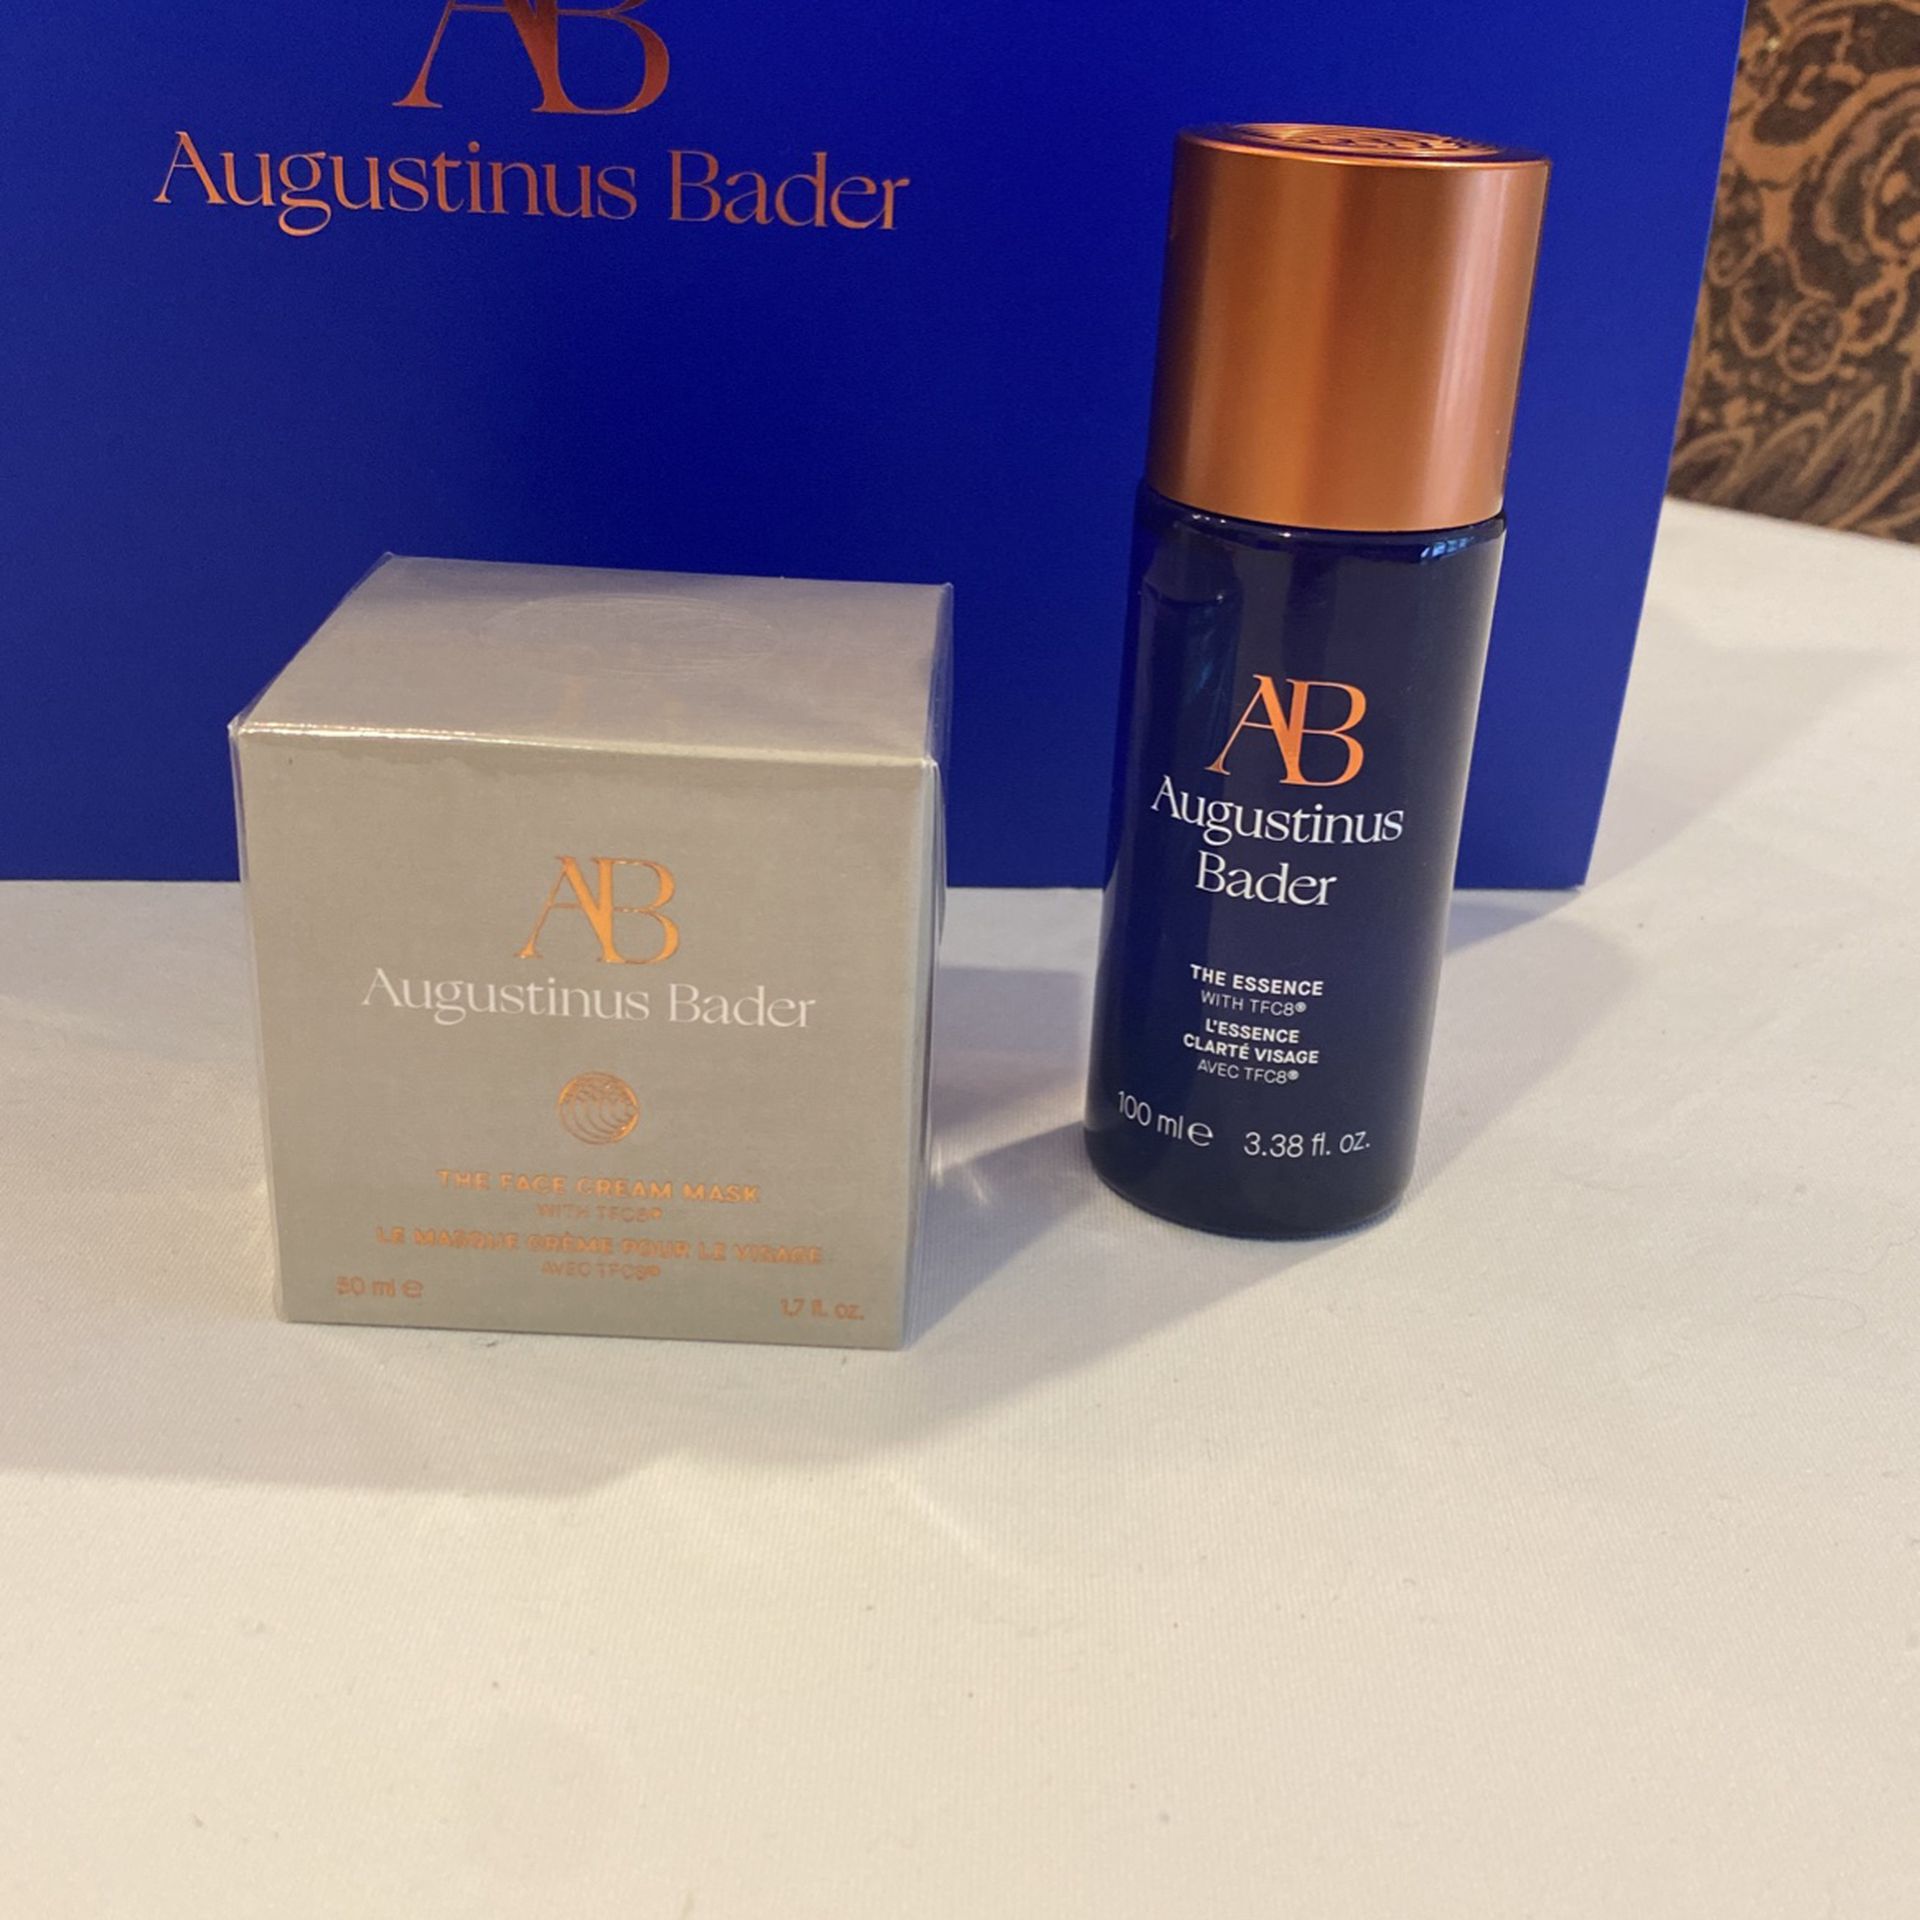 Augustine’s Bader The Essence 3.38 Fl Oz. And The Face Cream Mask 1.7 Fl Oz. Brand New Sold As Set